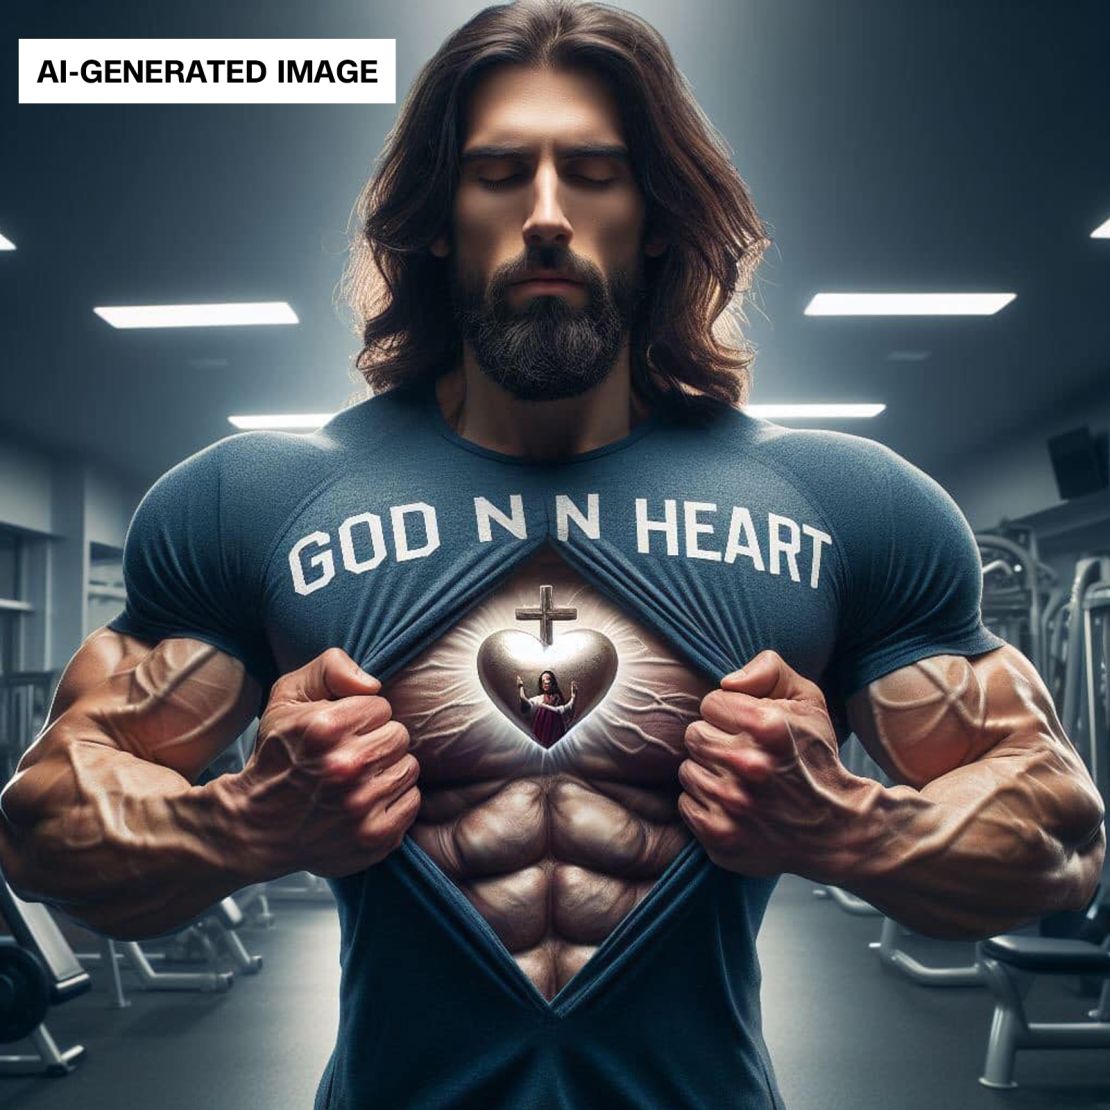 AI images of Jesus may contain details that showcase other ideals, like physical strength.